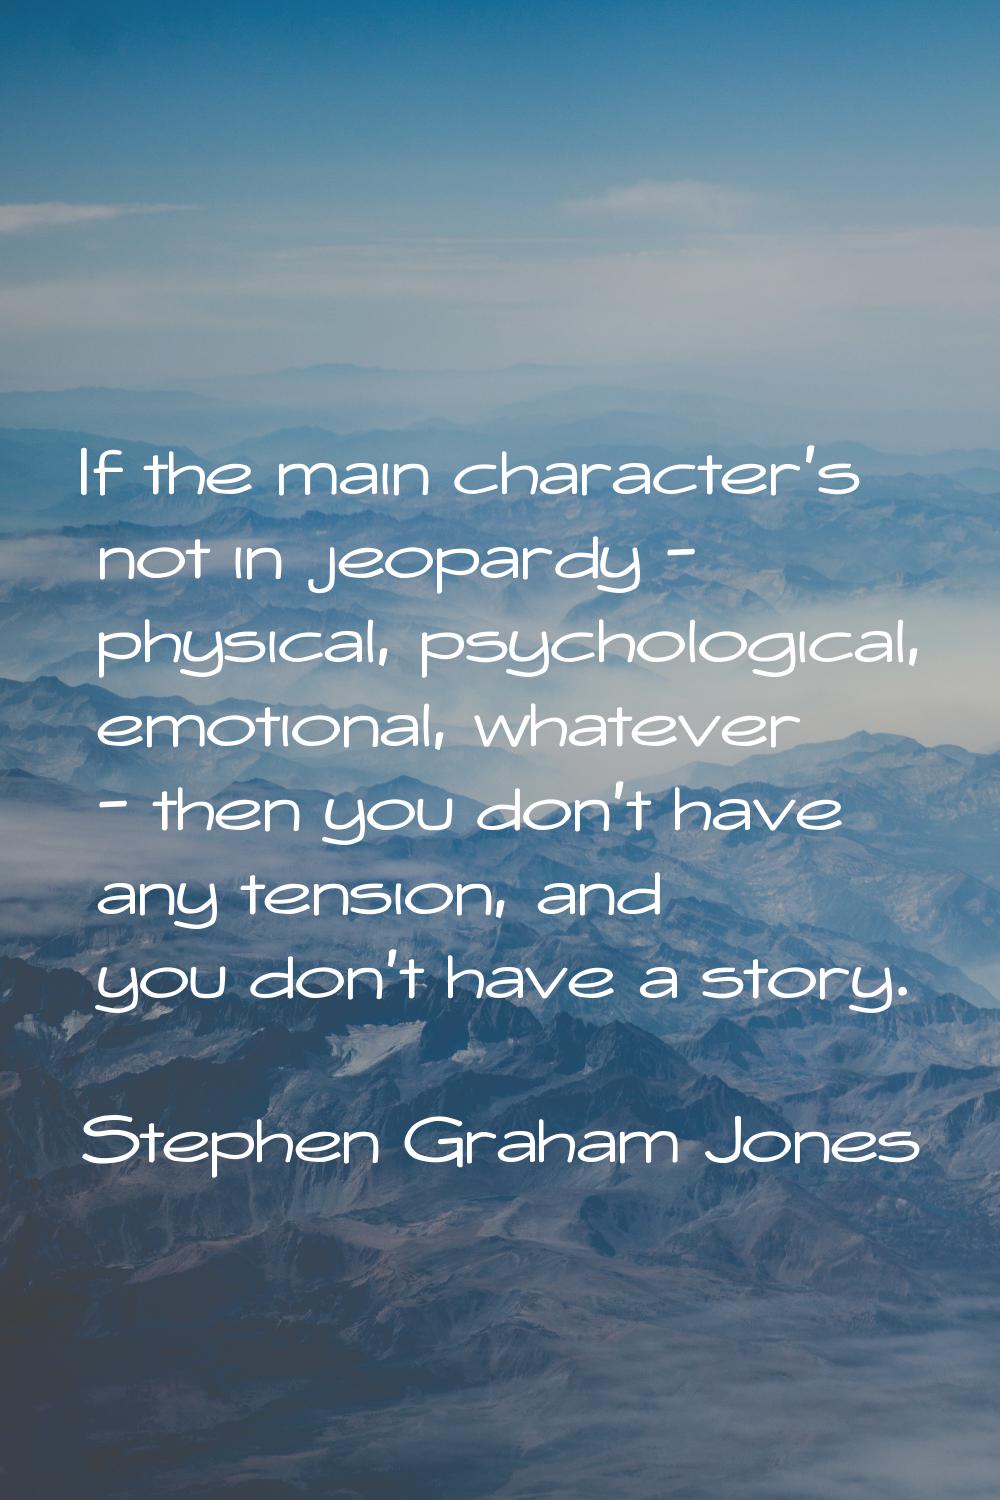 If the main character's not in jeopardy - physical, psychological, emotional, whatever - then you d